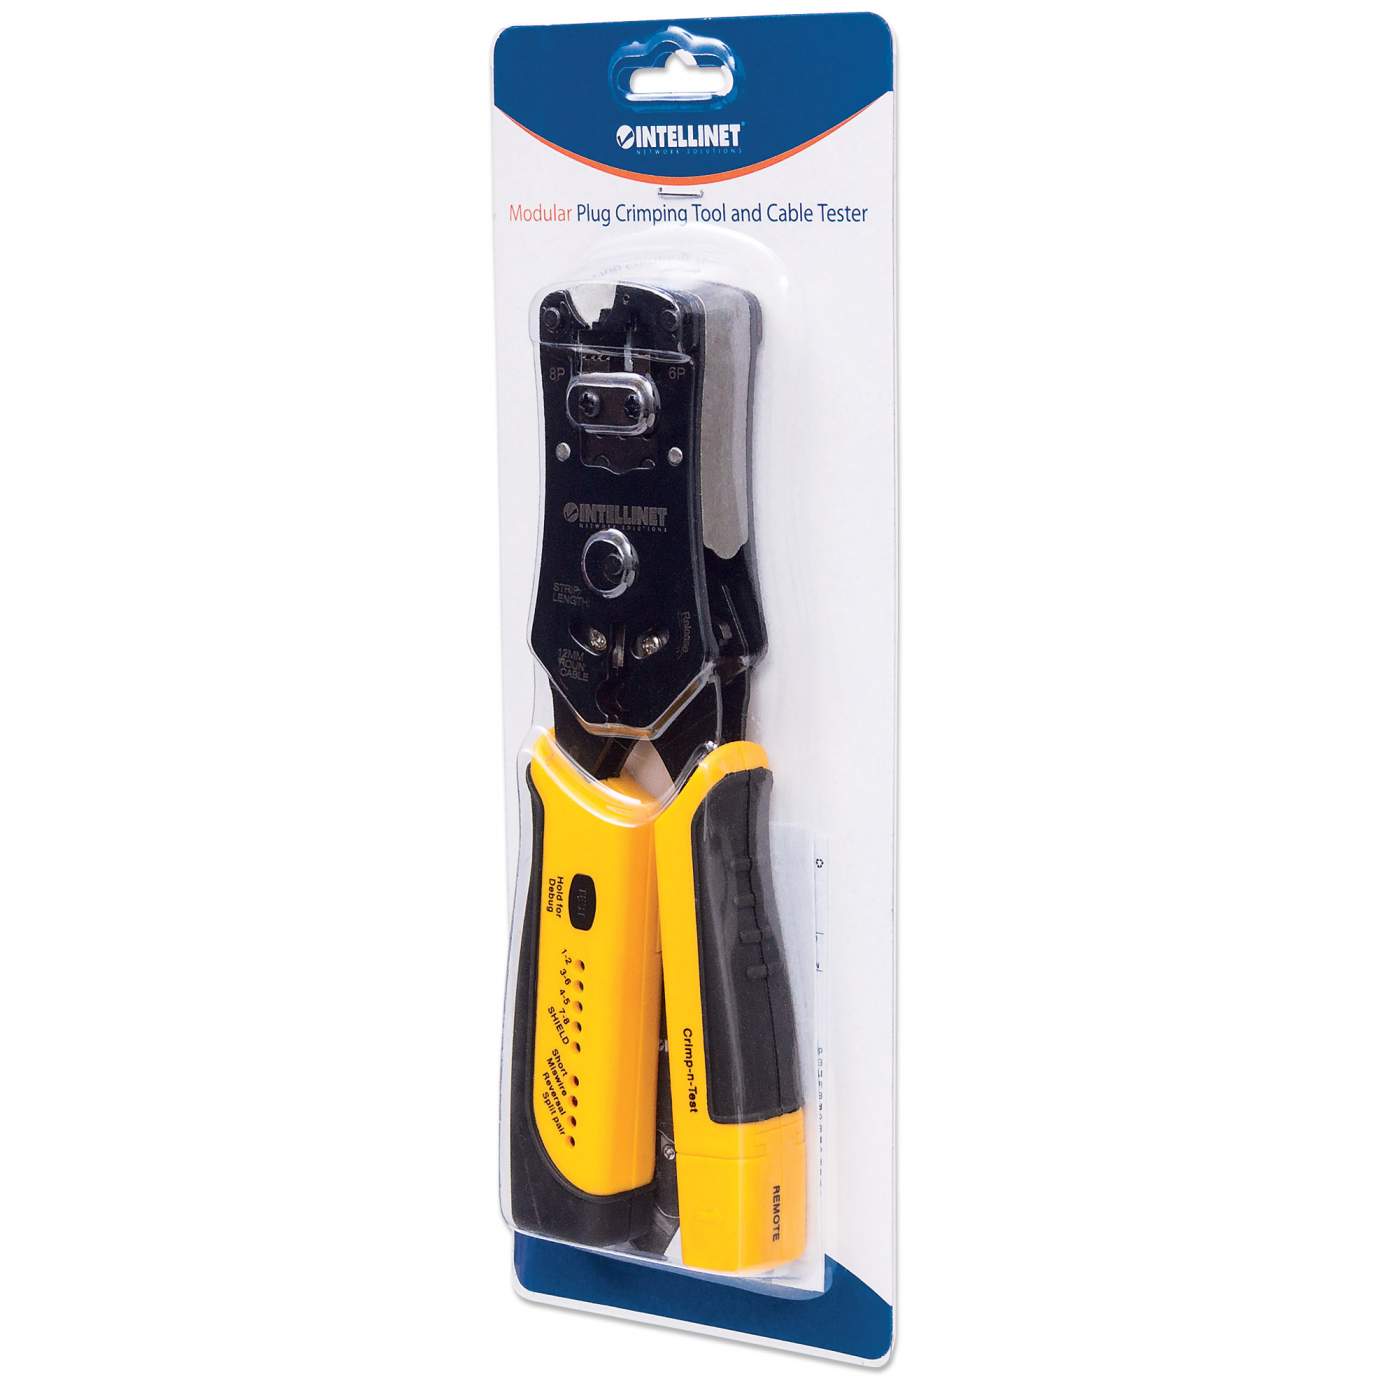 Universal Modular Plug Crimping Tool and Cable Tester Packaging Image 2